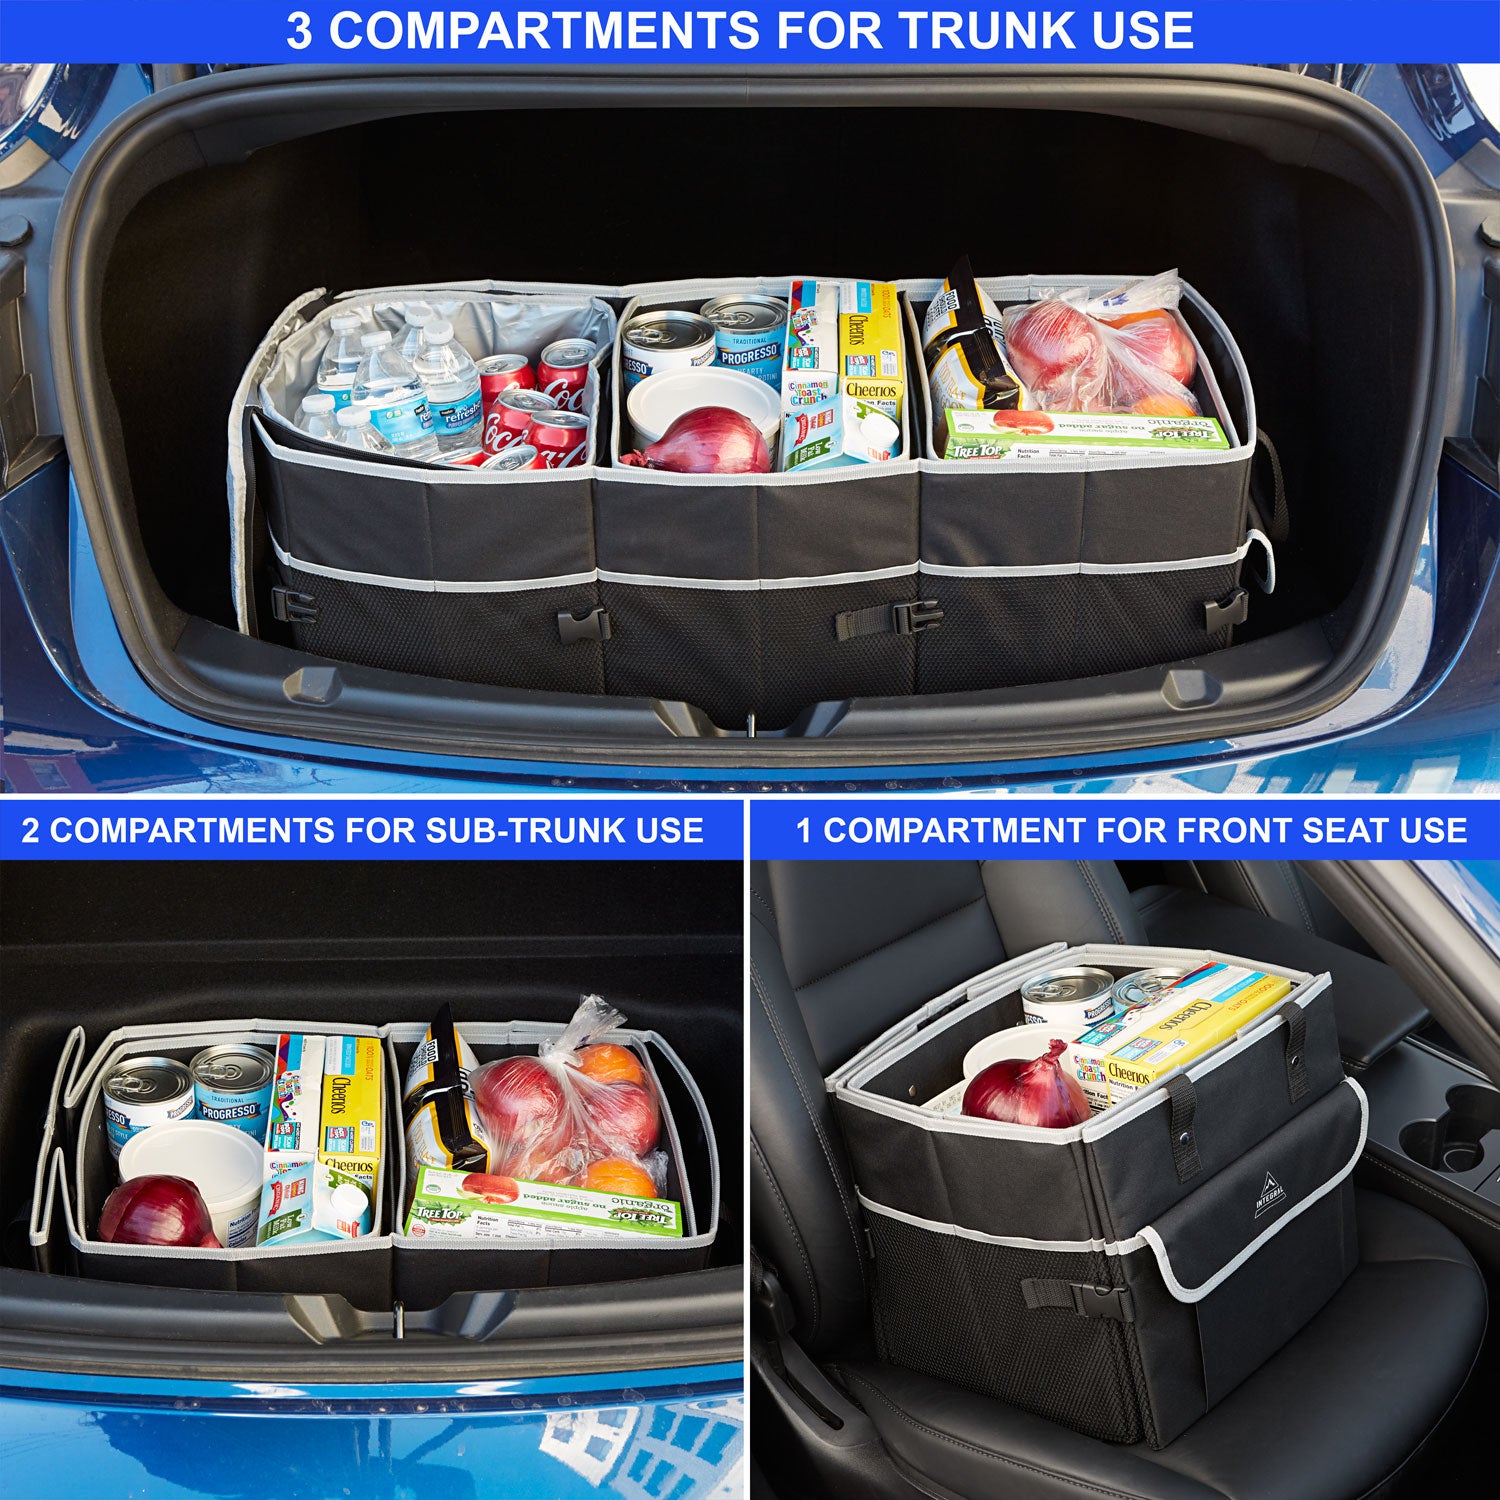 Integral™ Trunk Organizer With Cooler and Reusable Bags – Integral